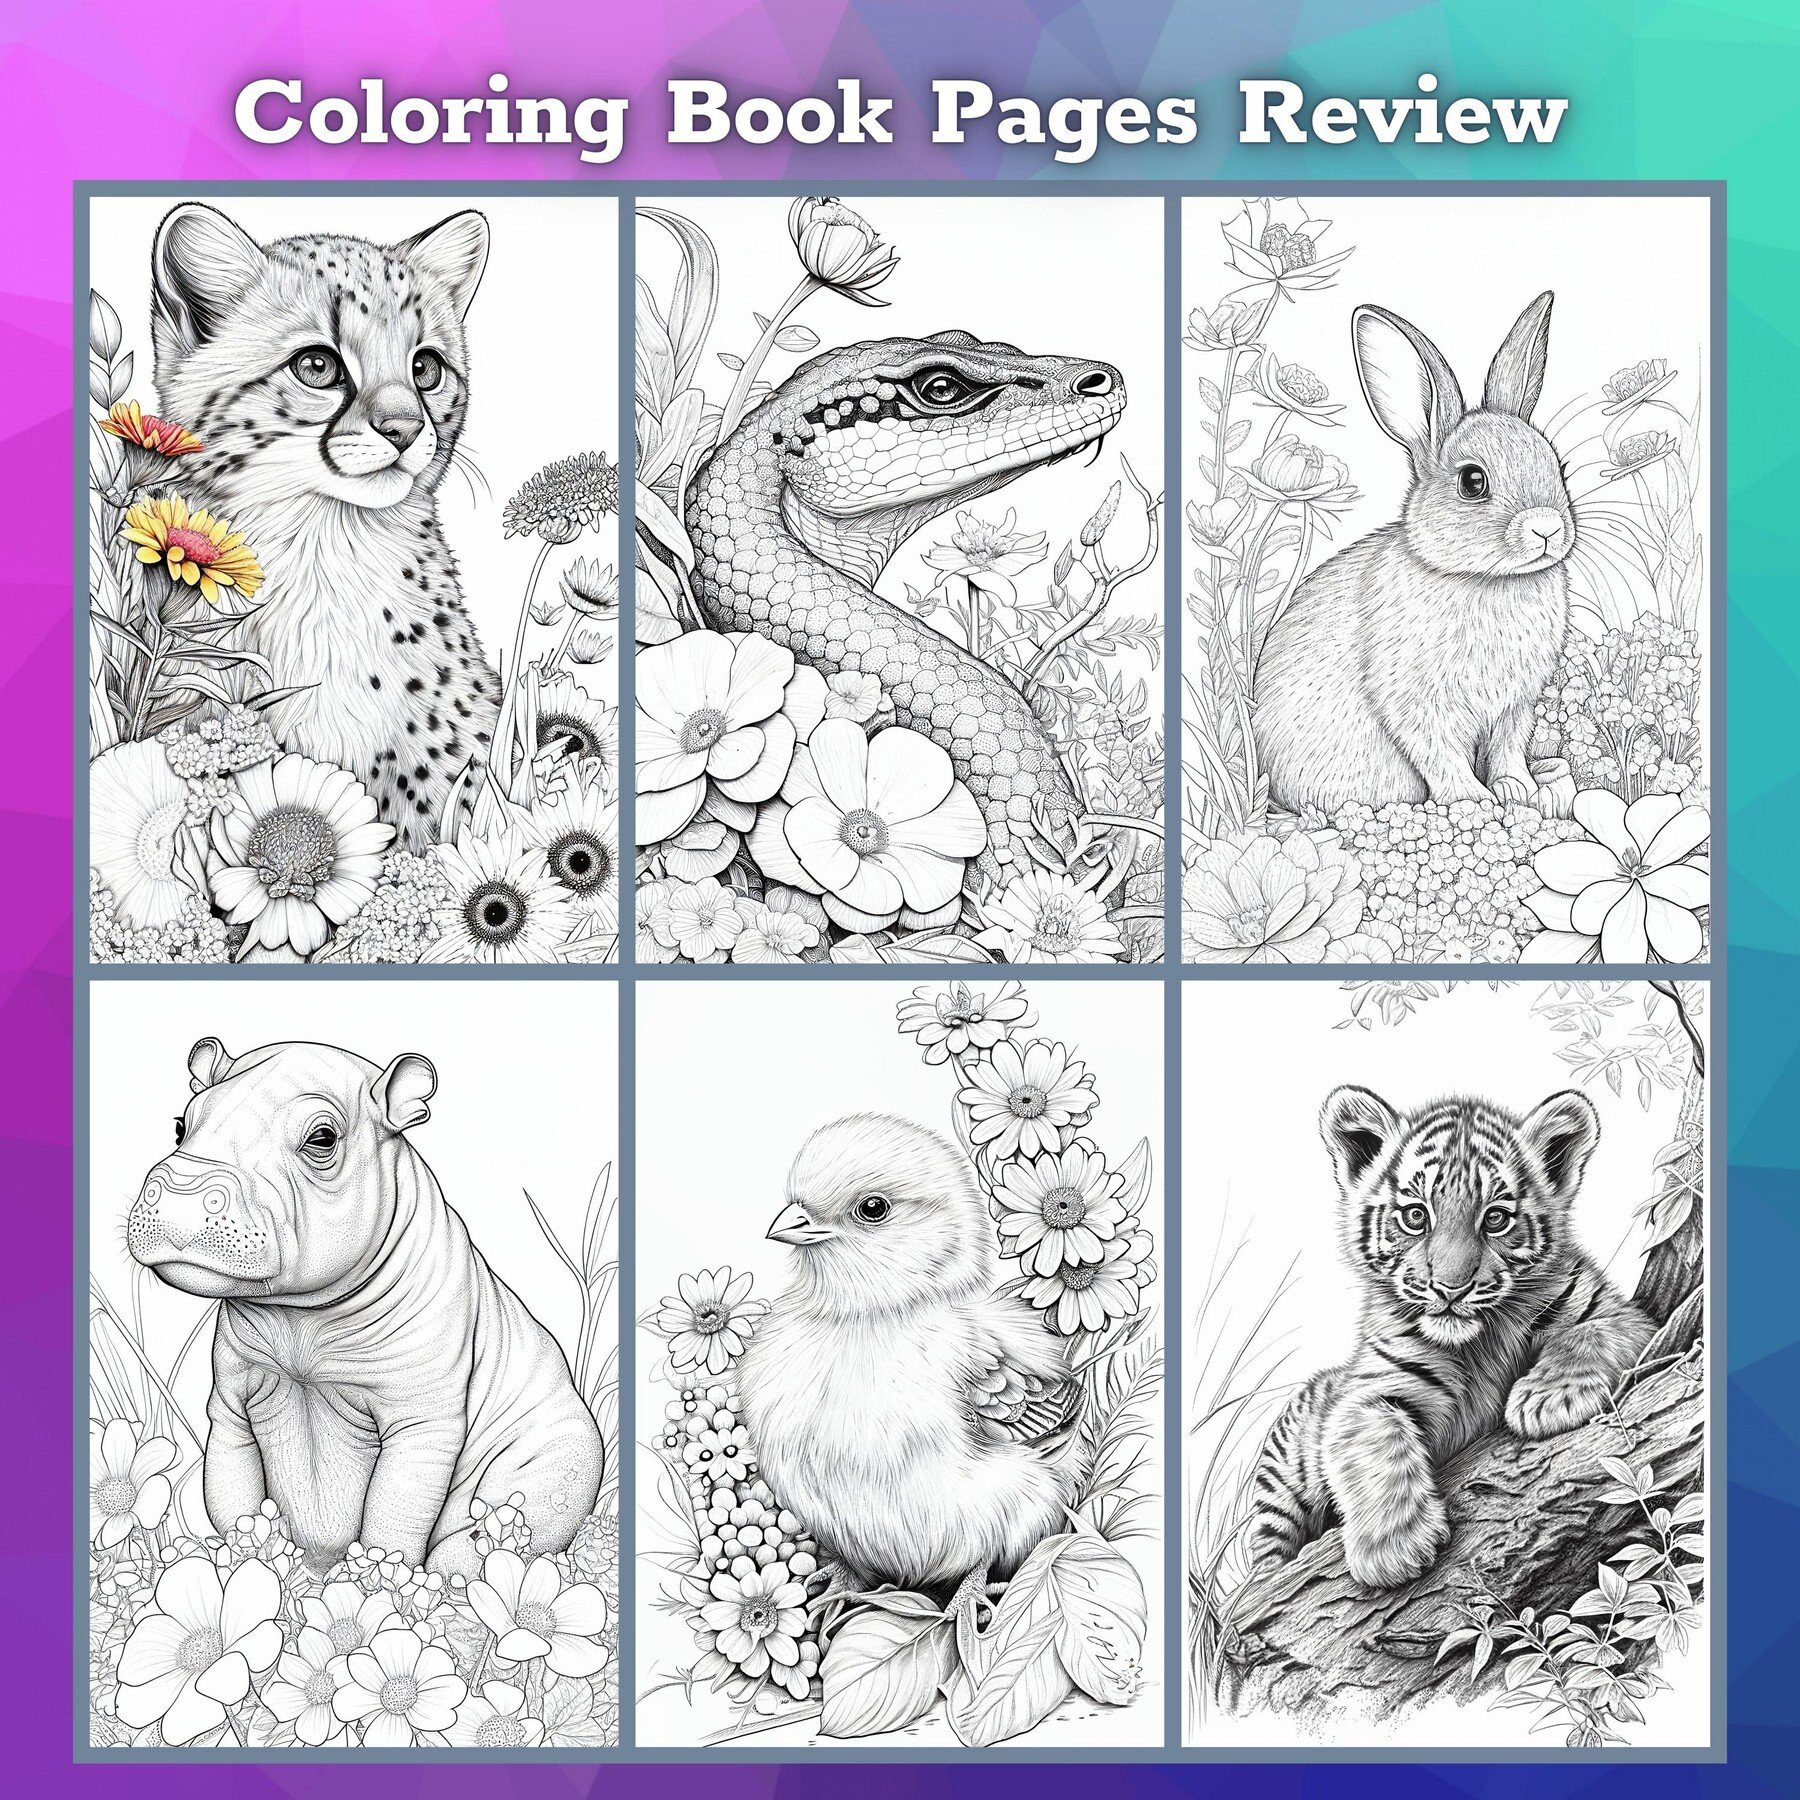 animls coloring book: Coloring Books For Kids and Adult, Coloring Book with  Fun, Easy, and Relaxing Coloring Pages, Disney coloring books fo  (Paperback)